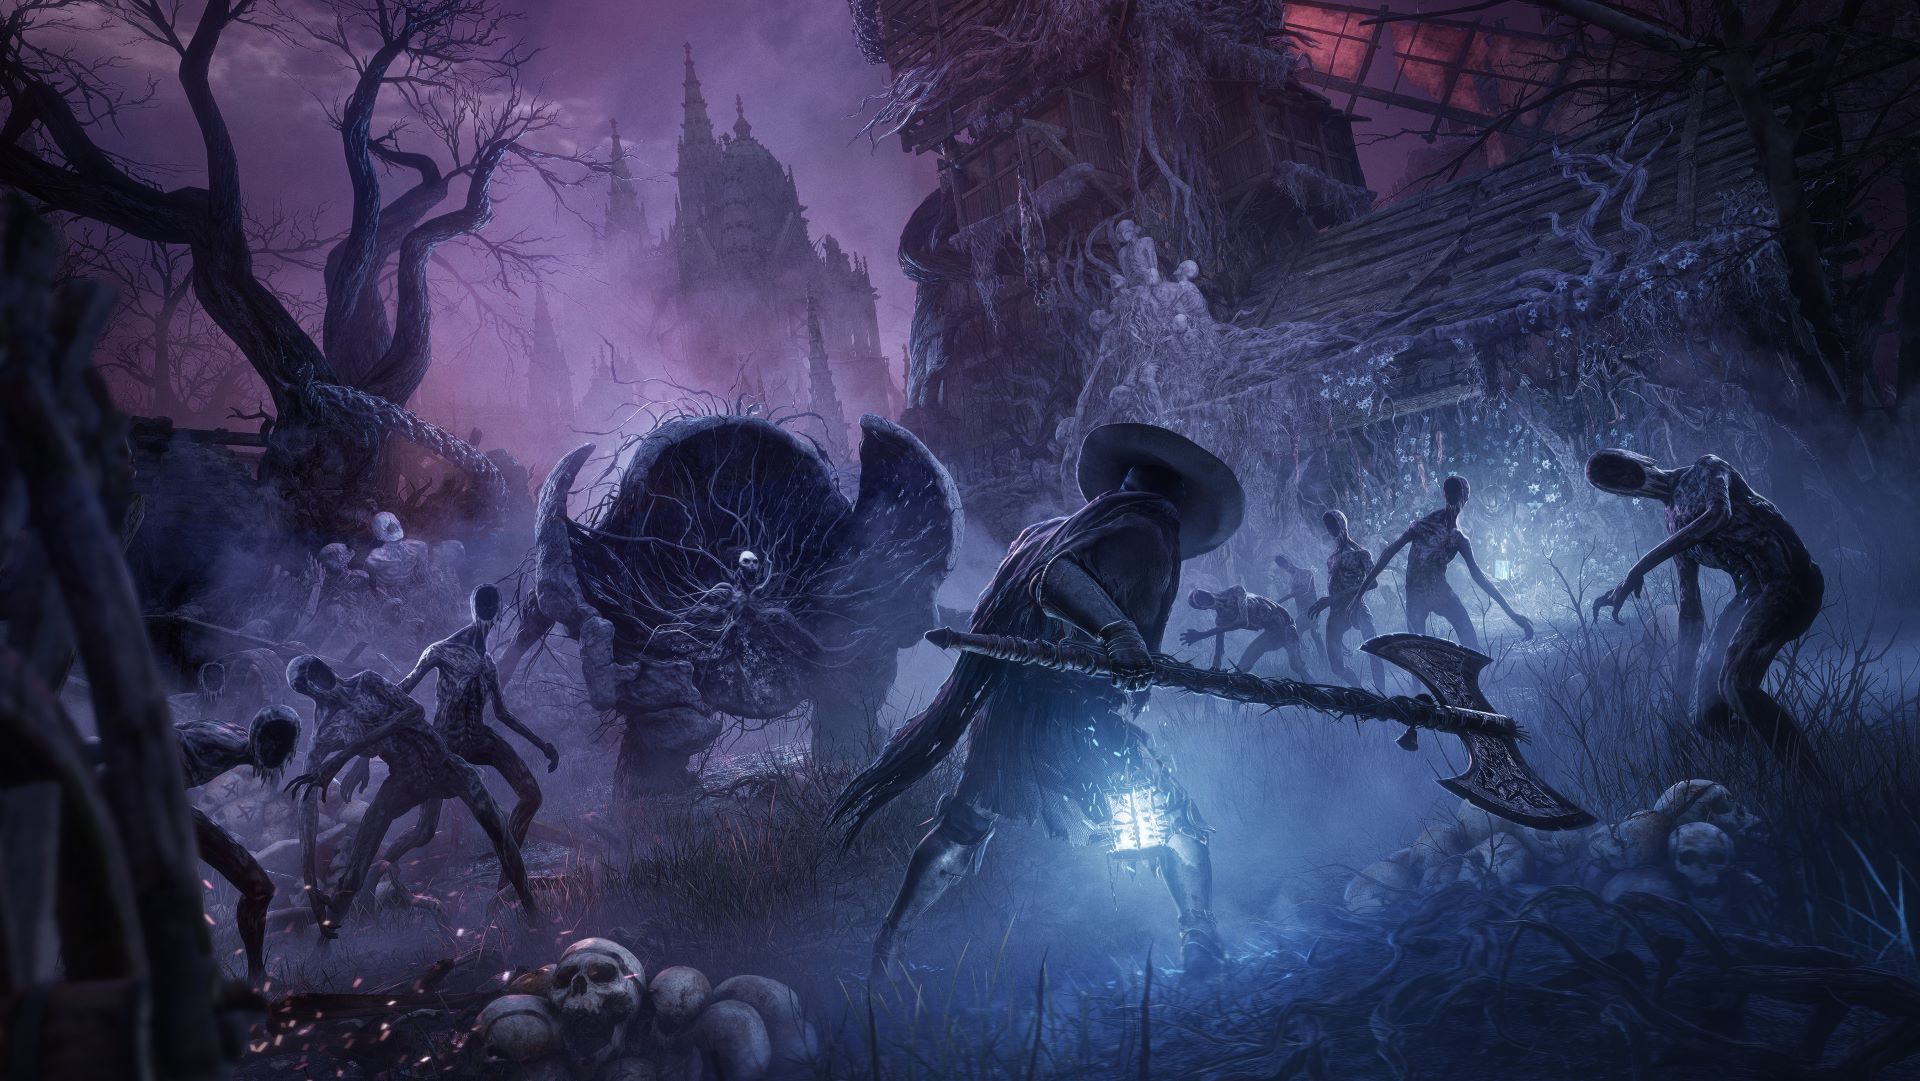 Guide to the Umbral Realm in Lords of the Fallen (LotF)